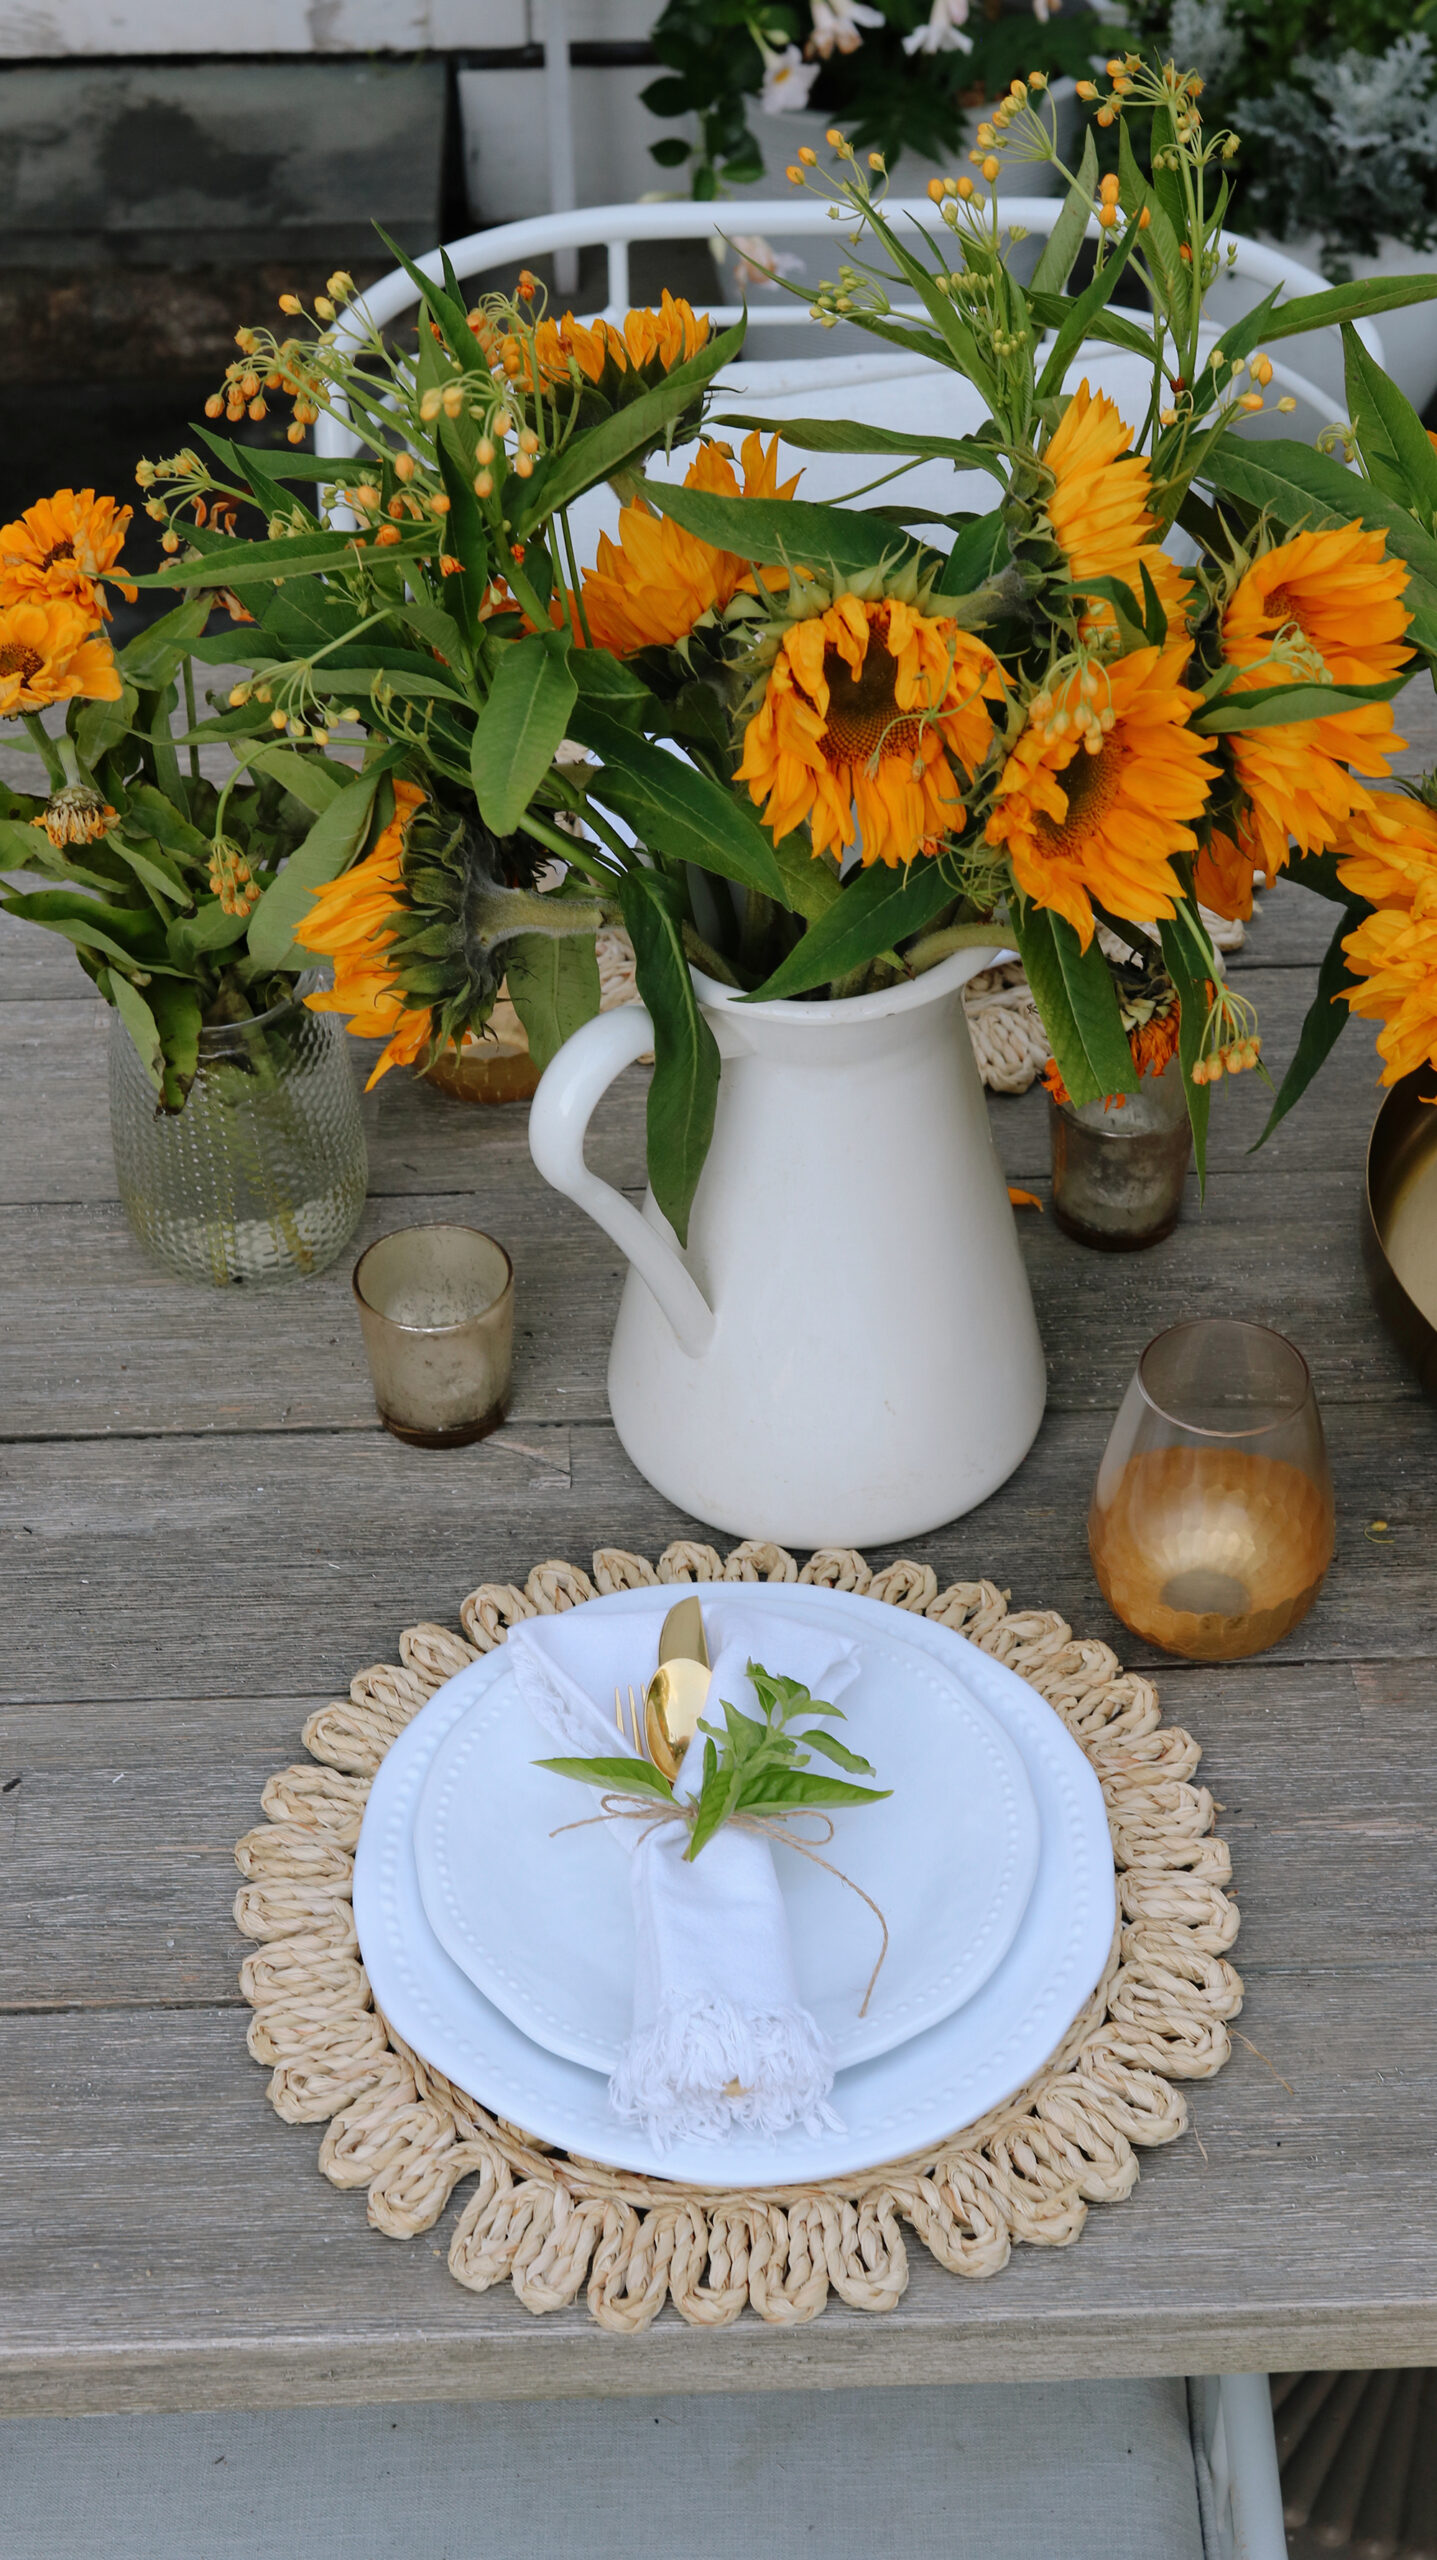 Nothing celebrates the beginning of a fall season like an alfresco sunflower backyard dinner. Enjoying the last few evenings of warmth and light! || Darling Darleen Top Lifestyle CT Blogger